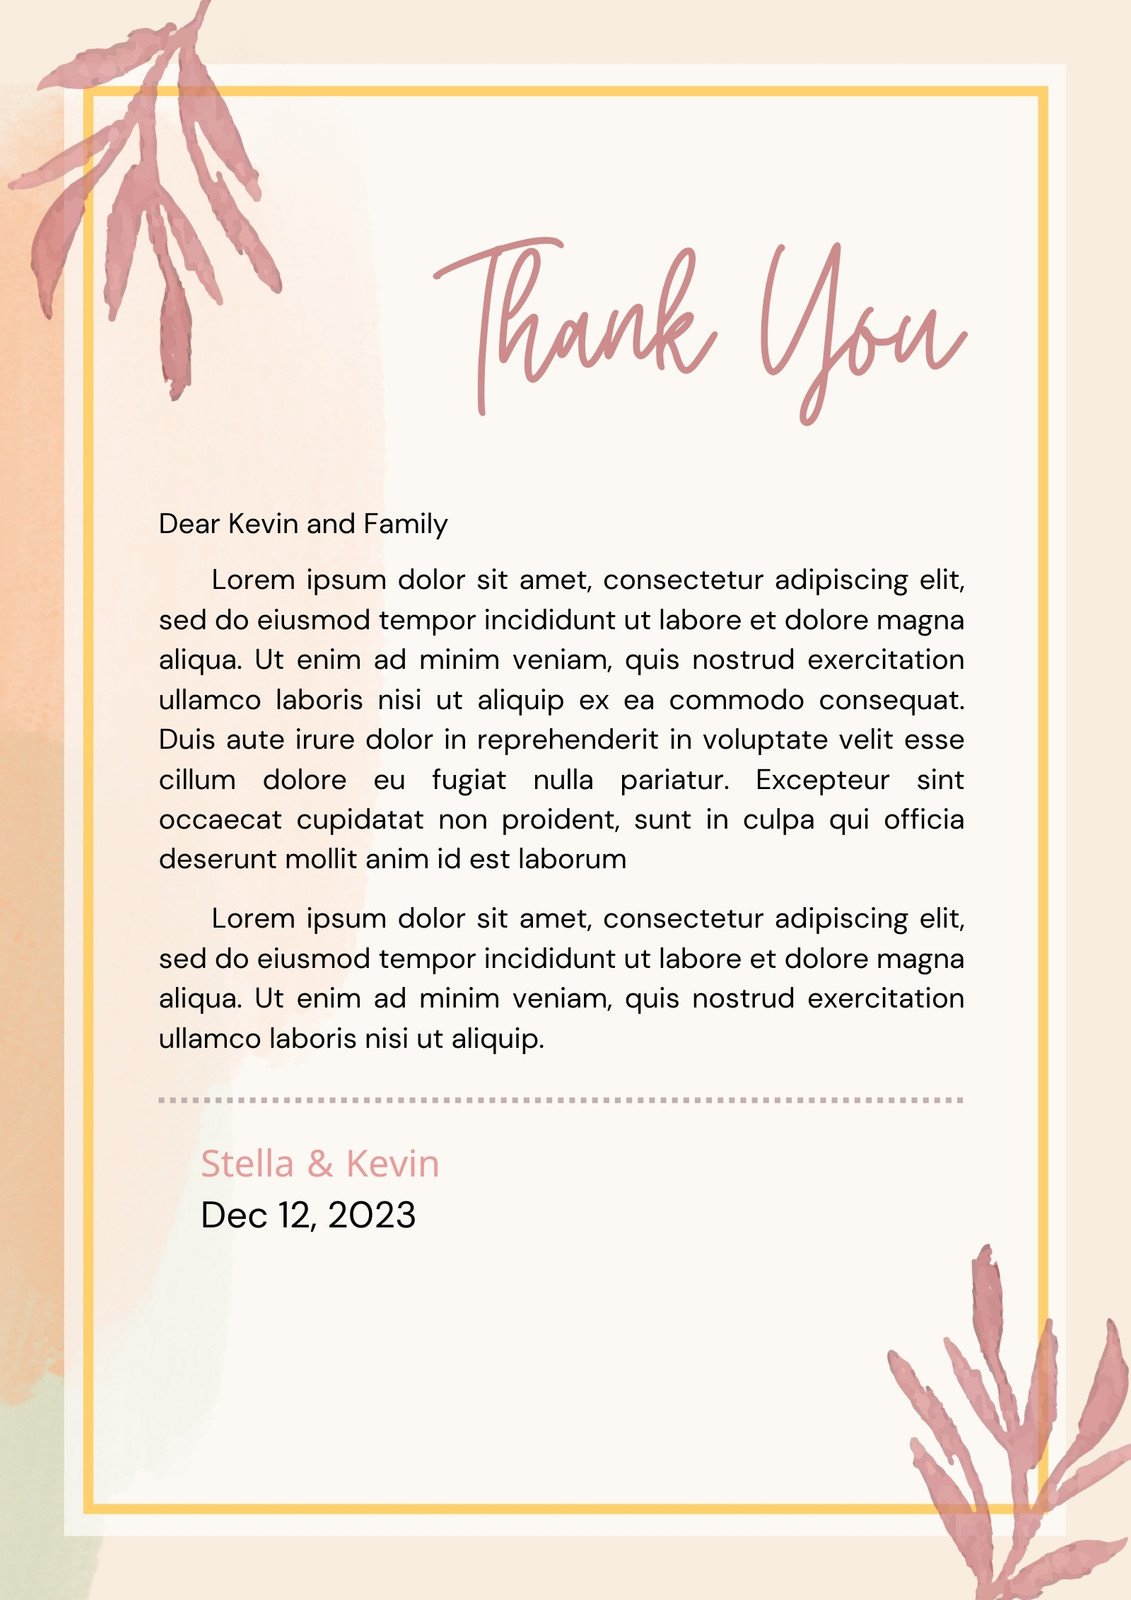 Free Business Thank You Letter Template Letterhub vrogue co